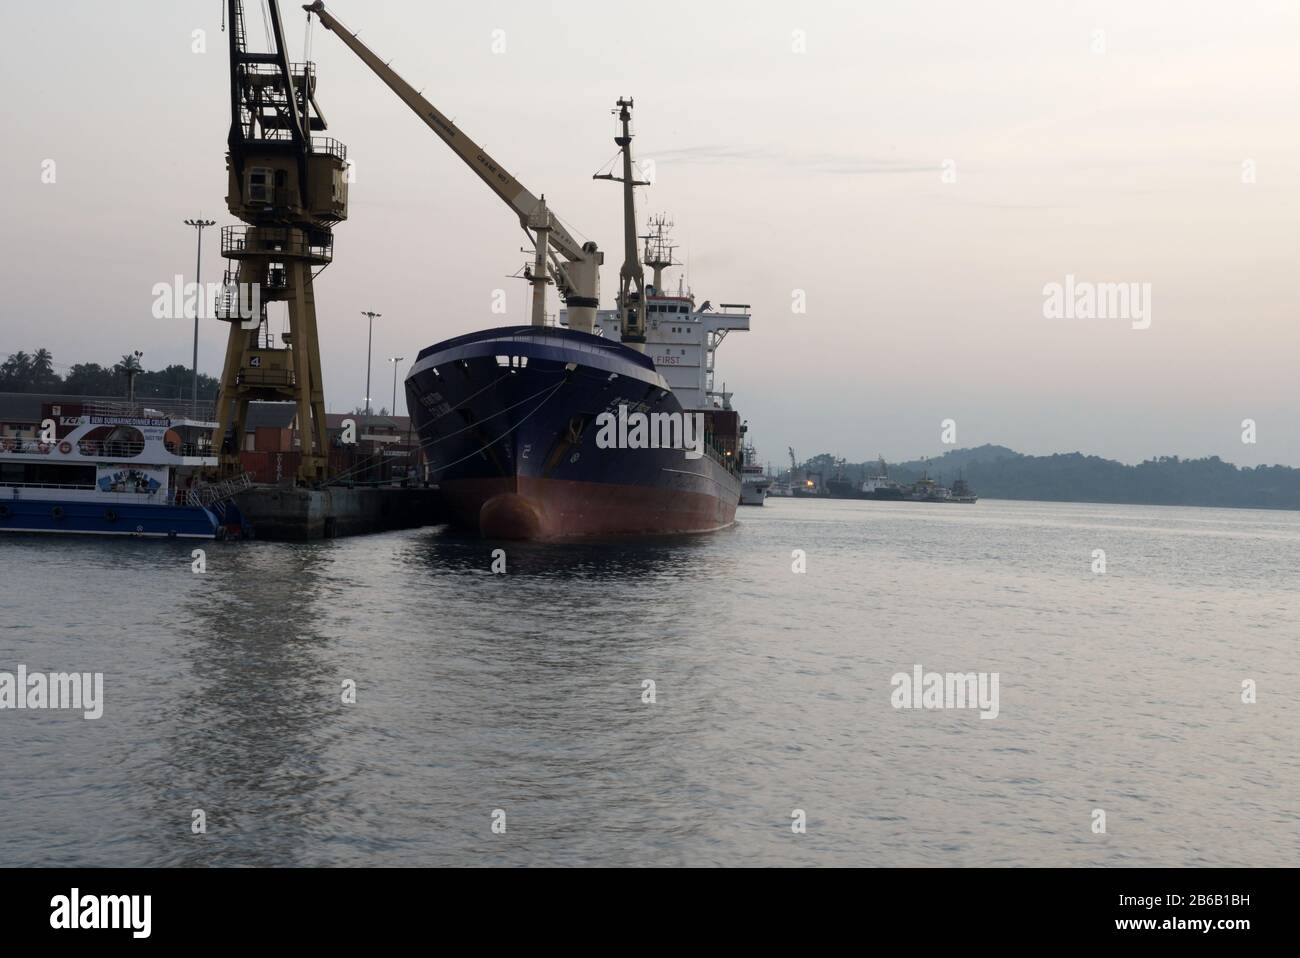 PORT BLAIR, INDIA - MARCH 1, 2020: Chatham Island in Port Blair in India. Chatham Island is 3 km north of downtown Port Blair. It is connected to the Stock Photo